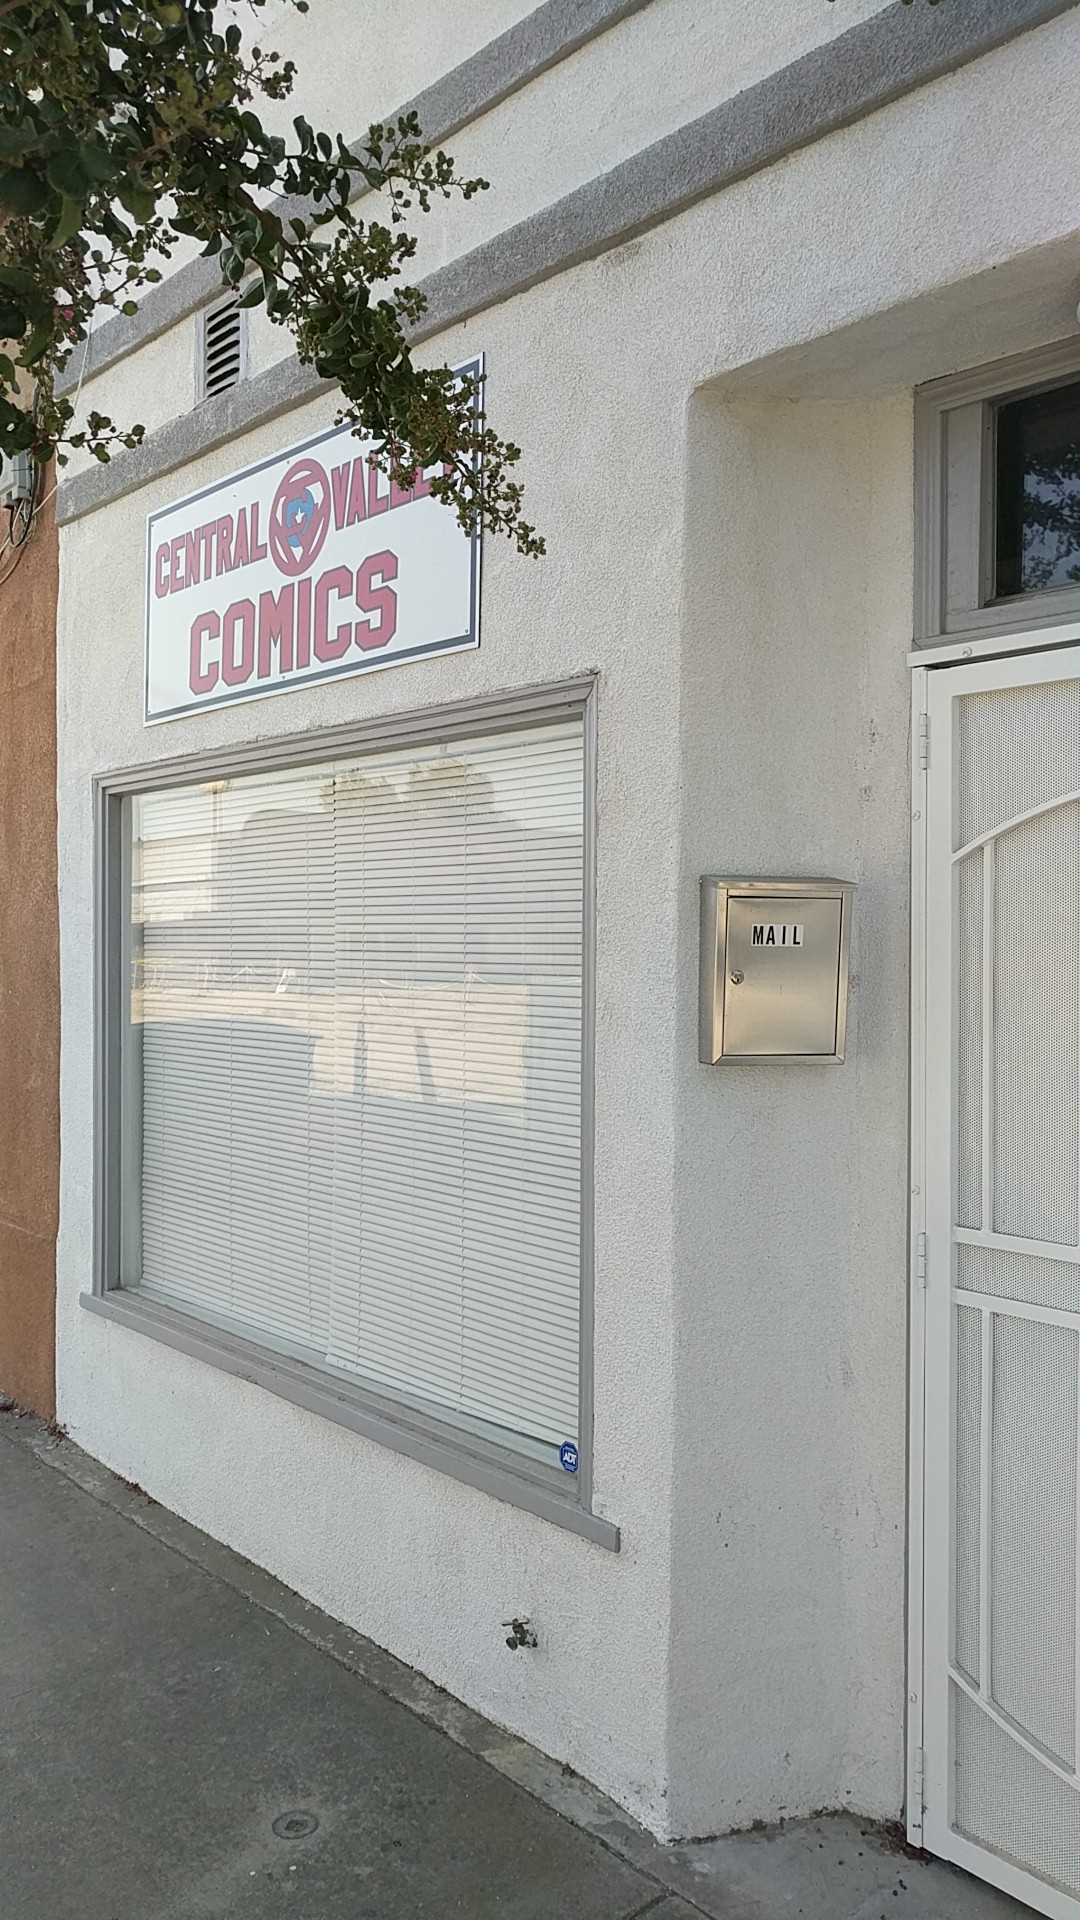 Central Valley Comics